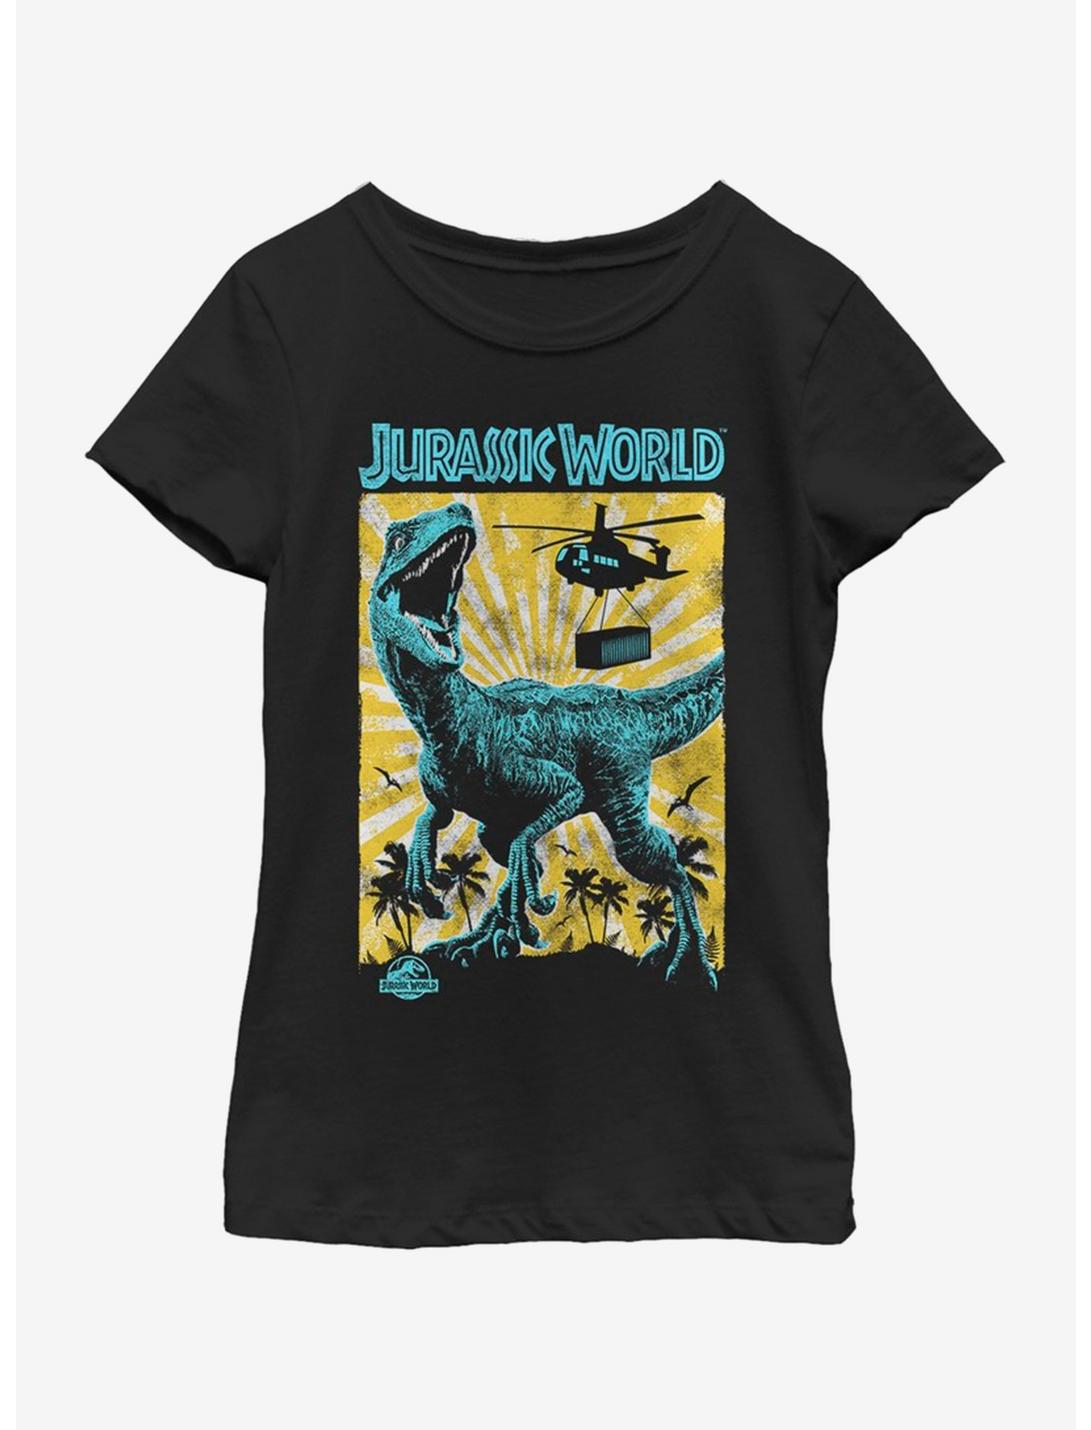 Jurassic Park Capture and Contain Youth Girls T-Shirt, BLACK, hi-res